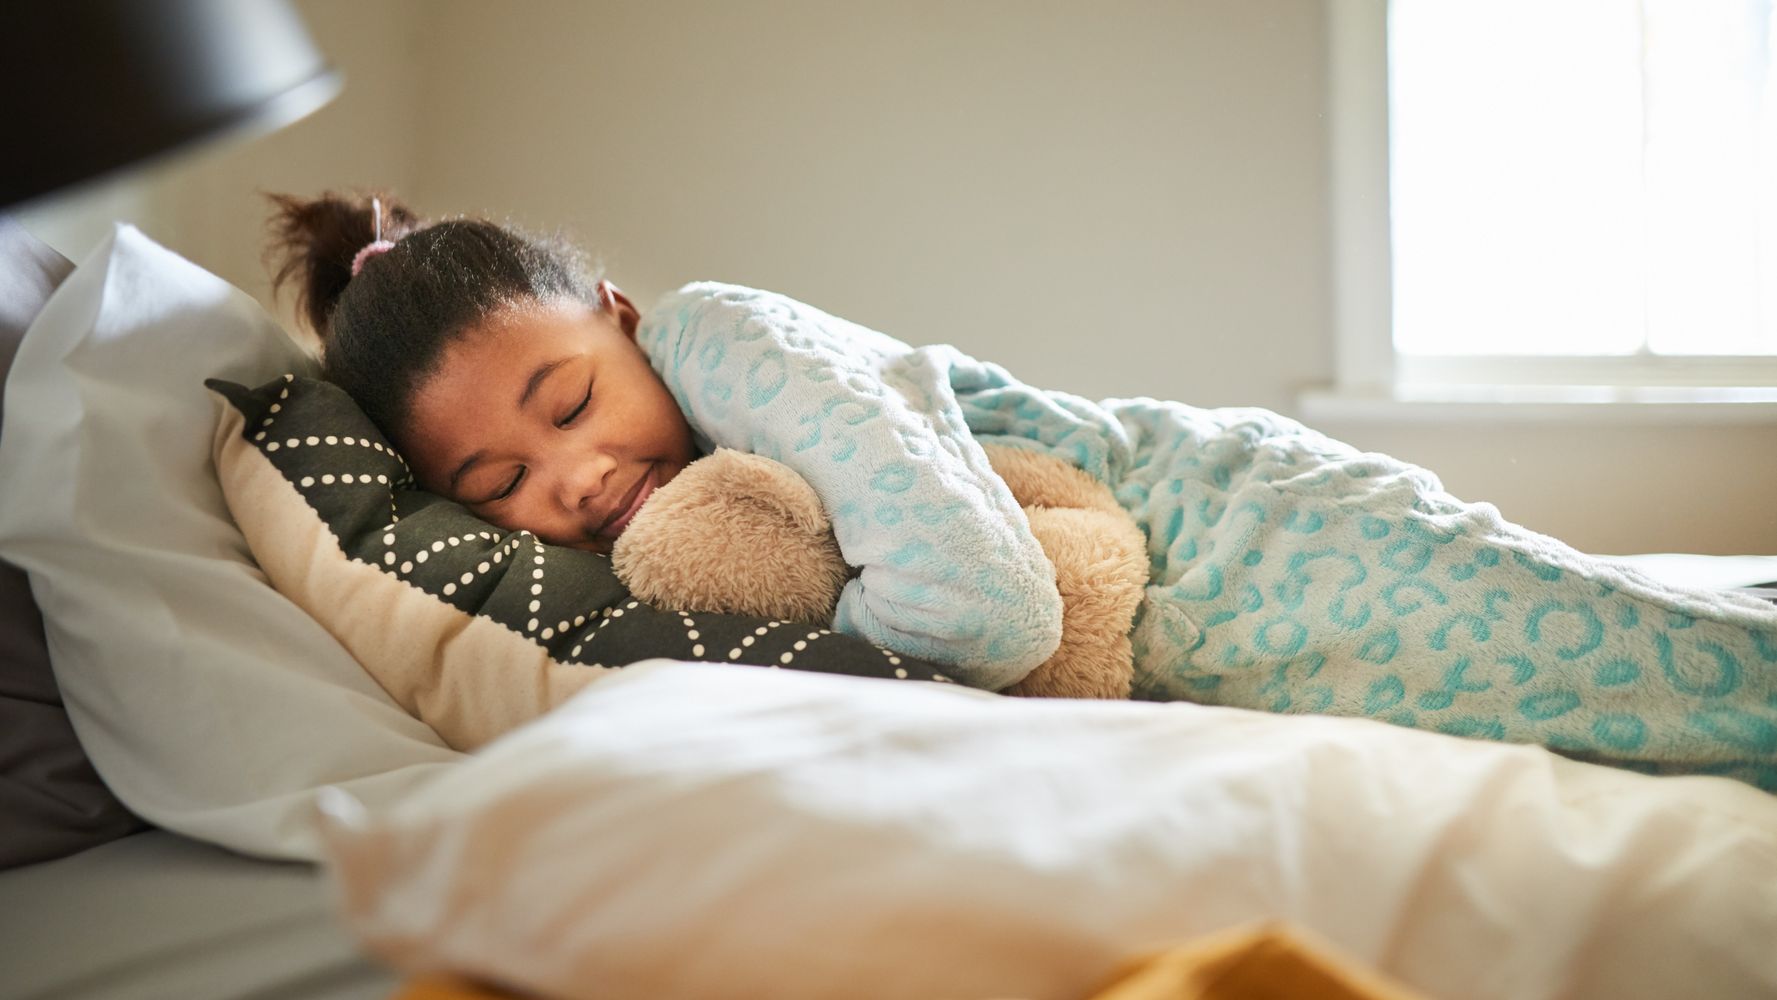 New study suggests parents should take children’s snoring seriously